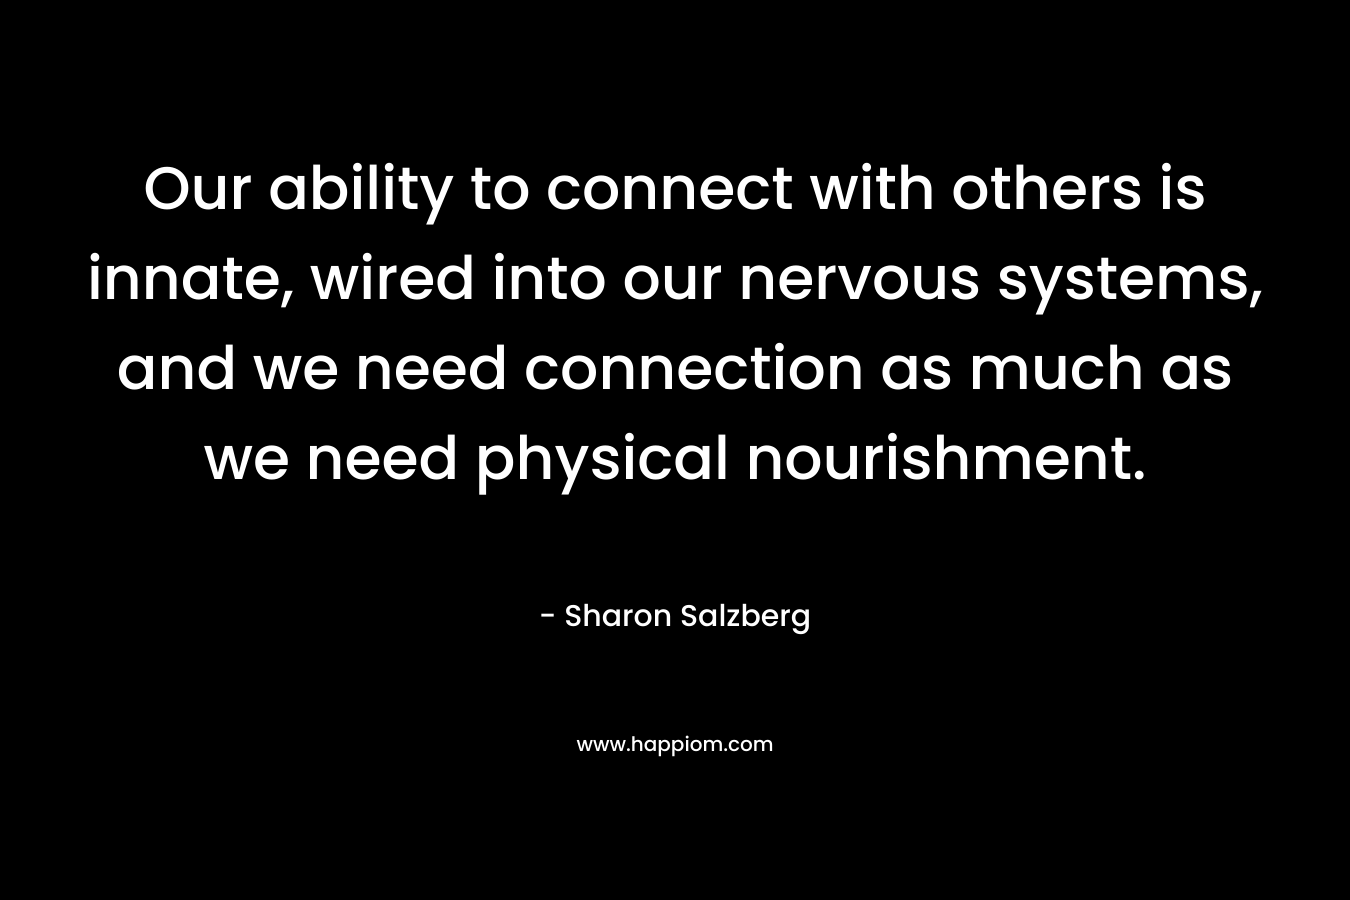 Our ability to connect with others is innate, wired into our nervous systems, and we need connection as much as we need physical nourishment. – Sharon Salzberg